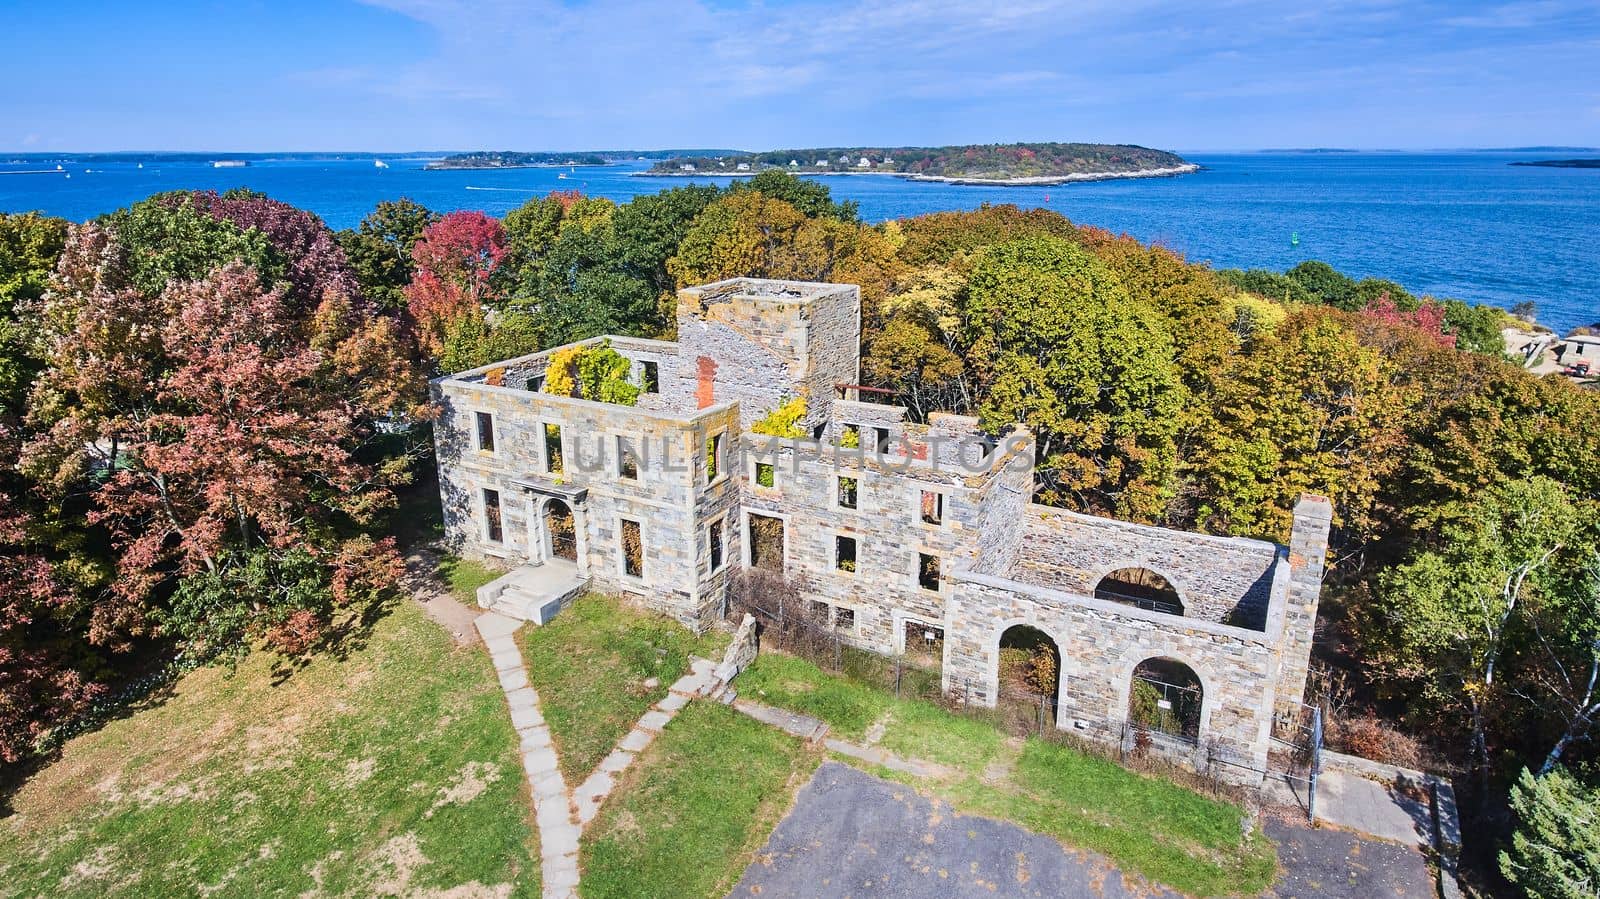 Aerial over old abandoned stone structure in great condition with Maine ocean in background by njproductions